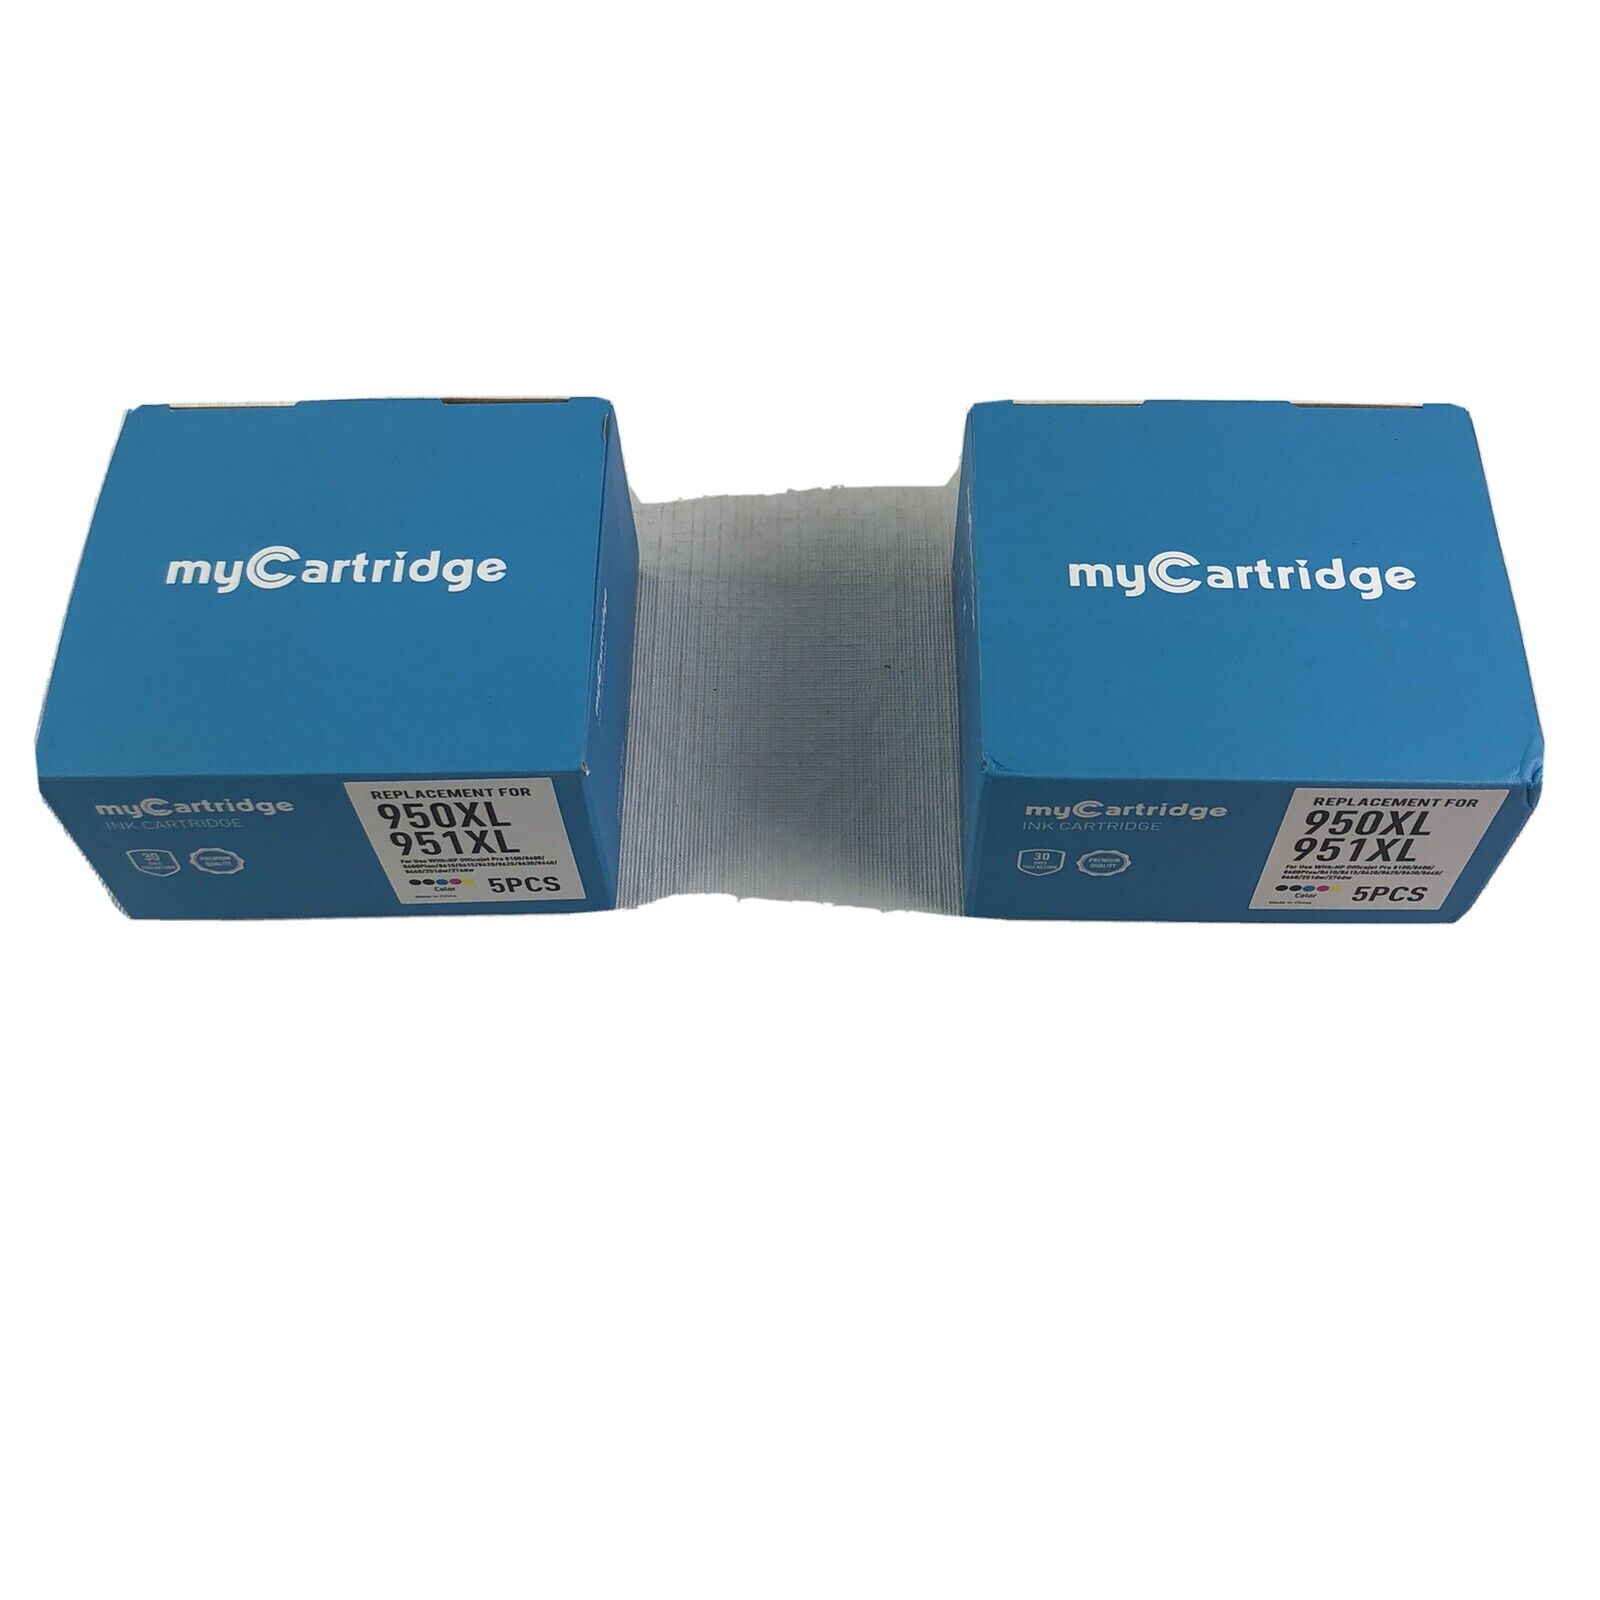 MY Cartridge Compatible Ink Cartridge Replacement for HP 950XL 951XL, Pack of 10